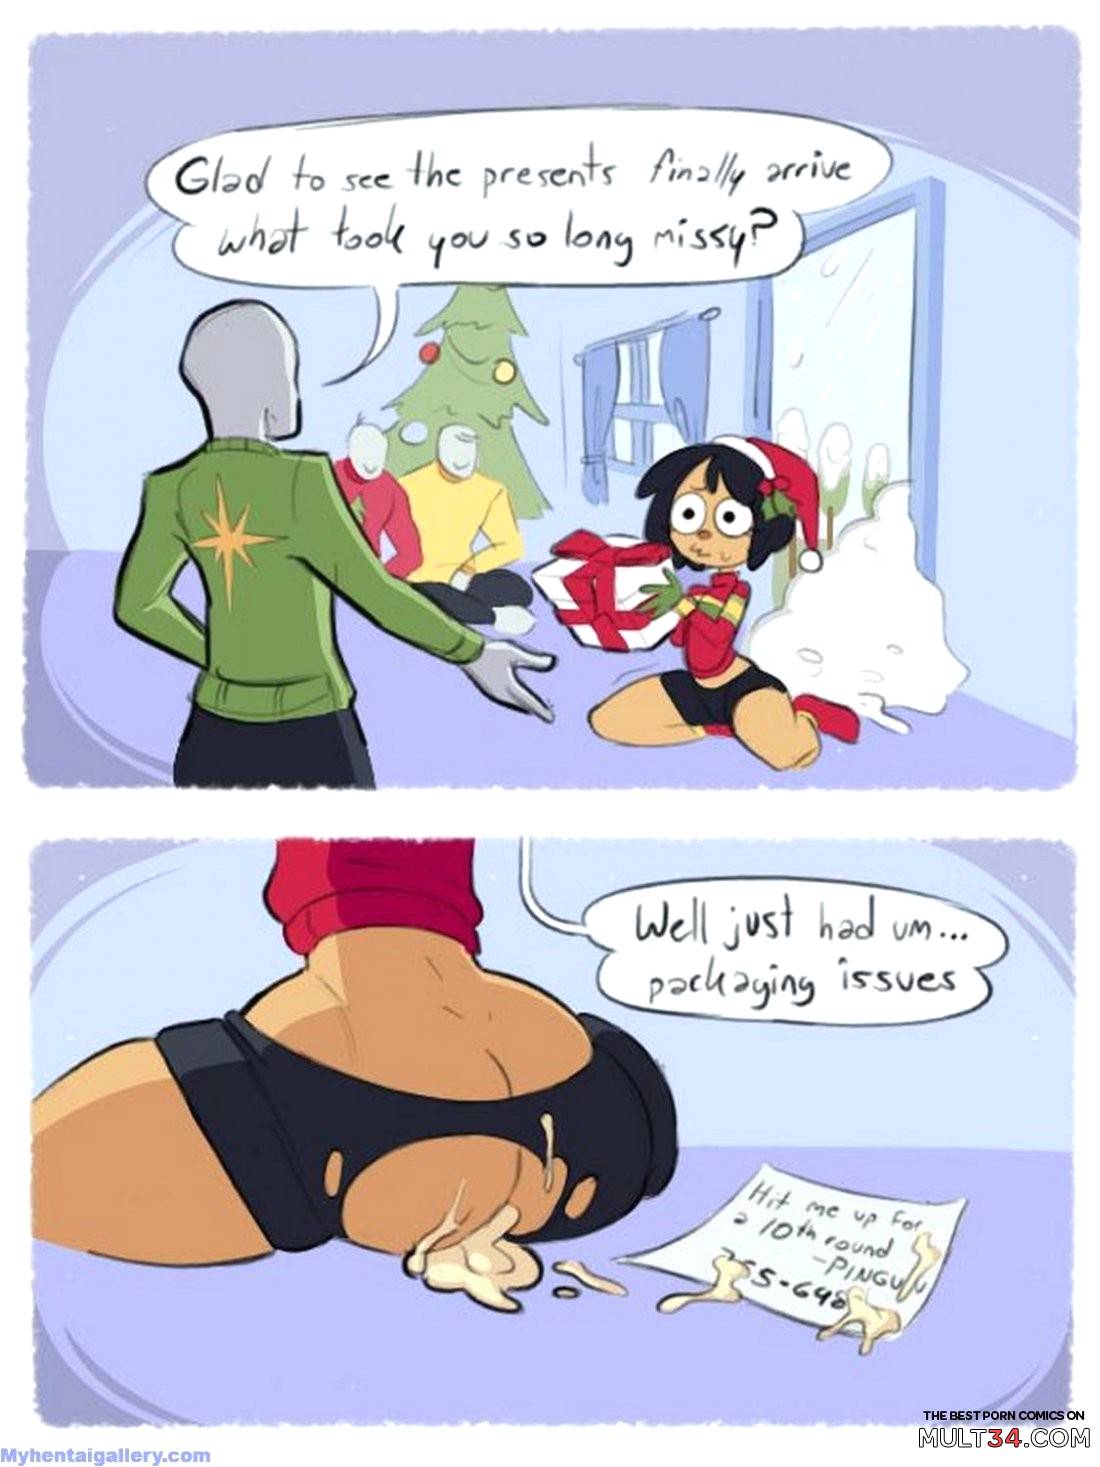 Sled Delivery page 3